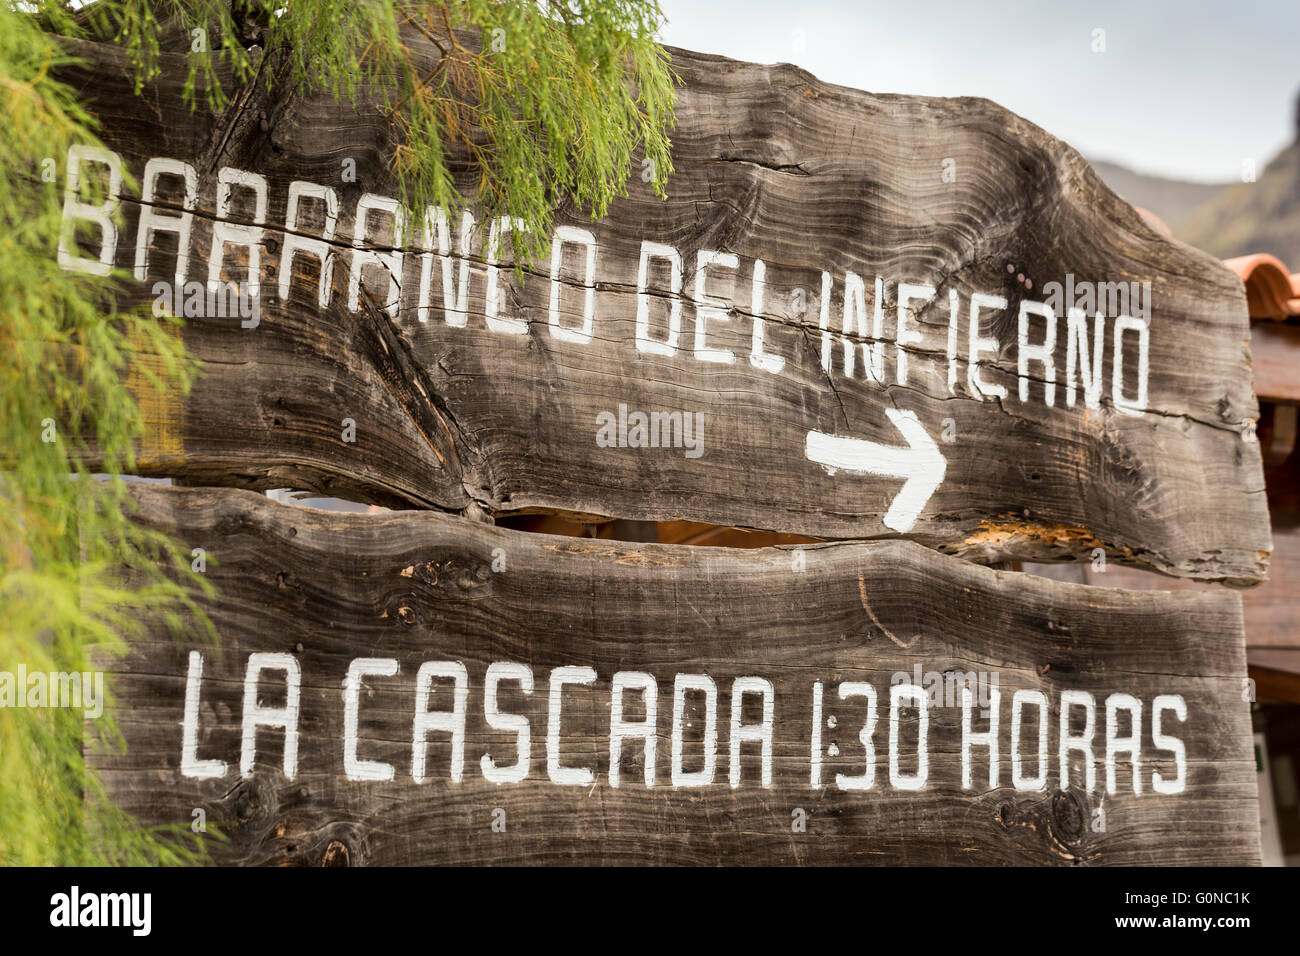 Old rustic wooden sign at the start of the barranco del infierno walk in Adeje, Tenerife, Canary Islands, Spain. Stock Photo